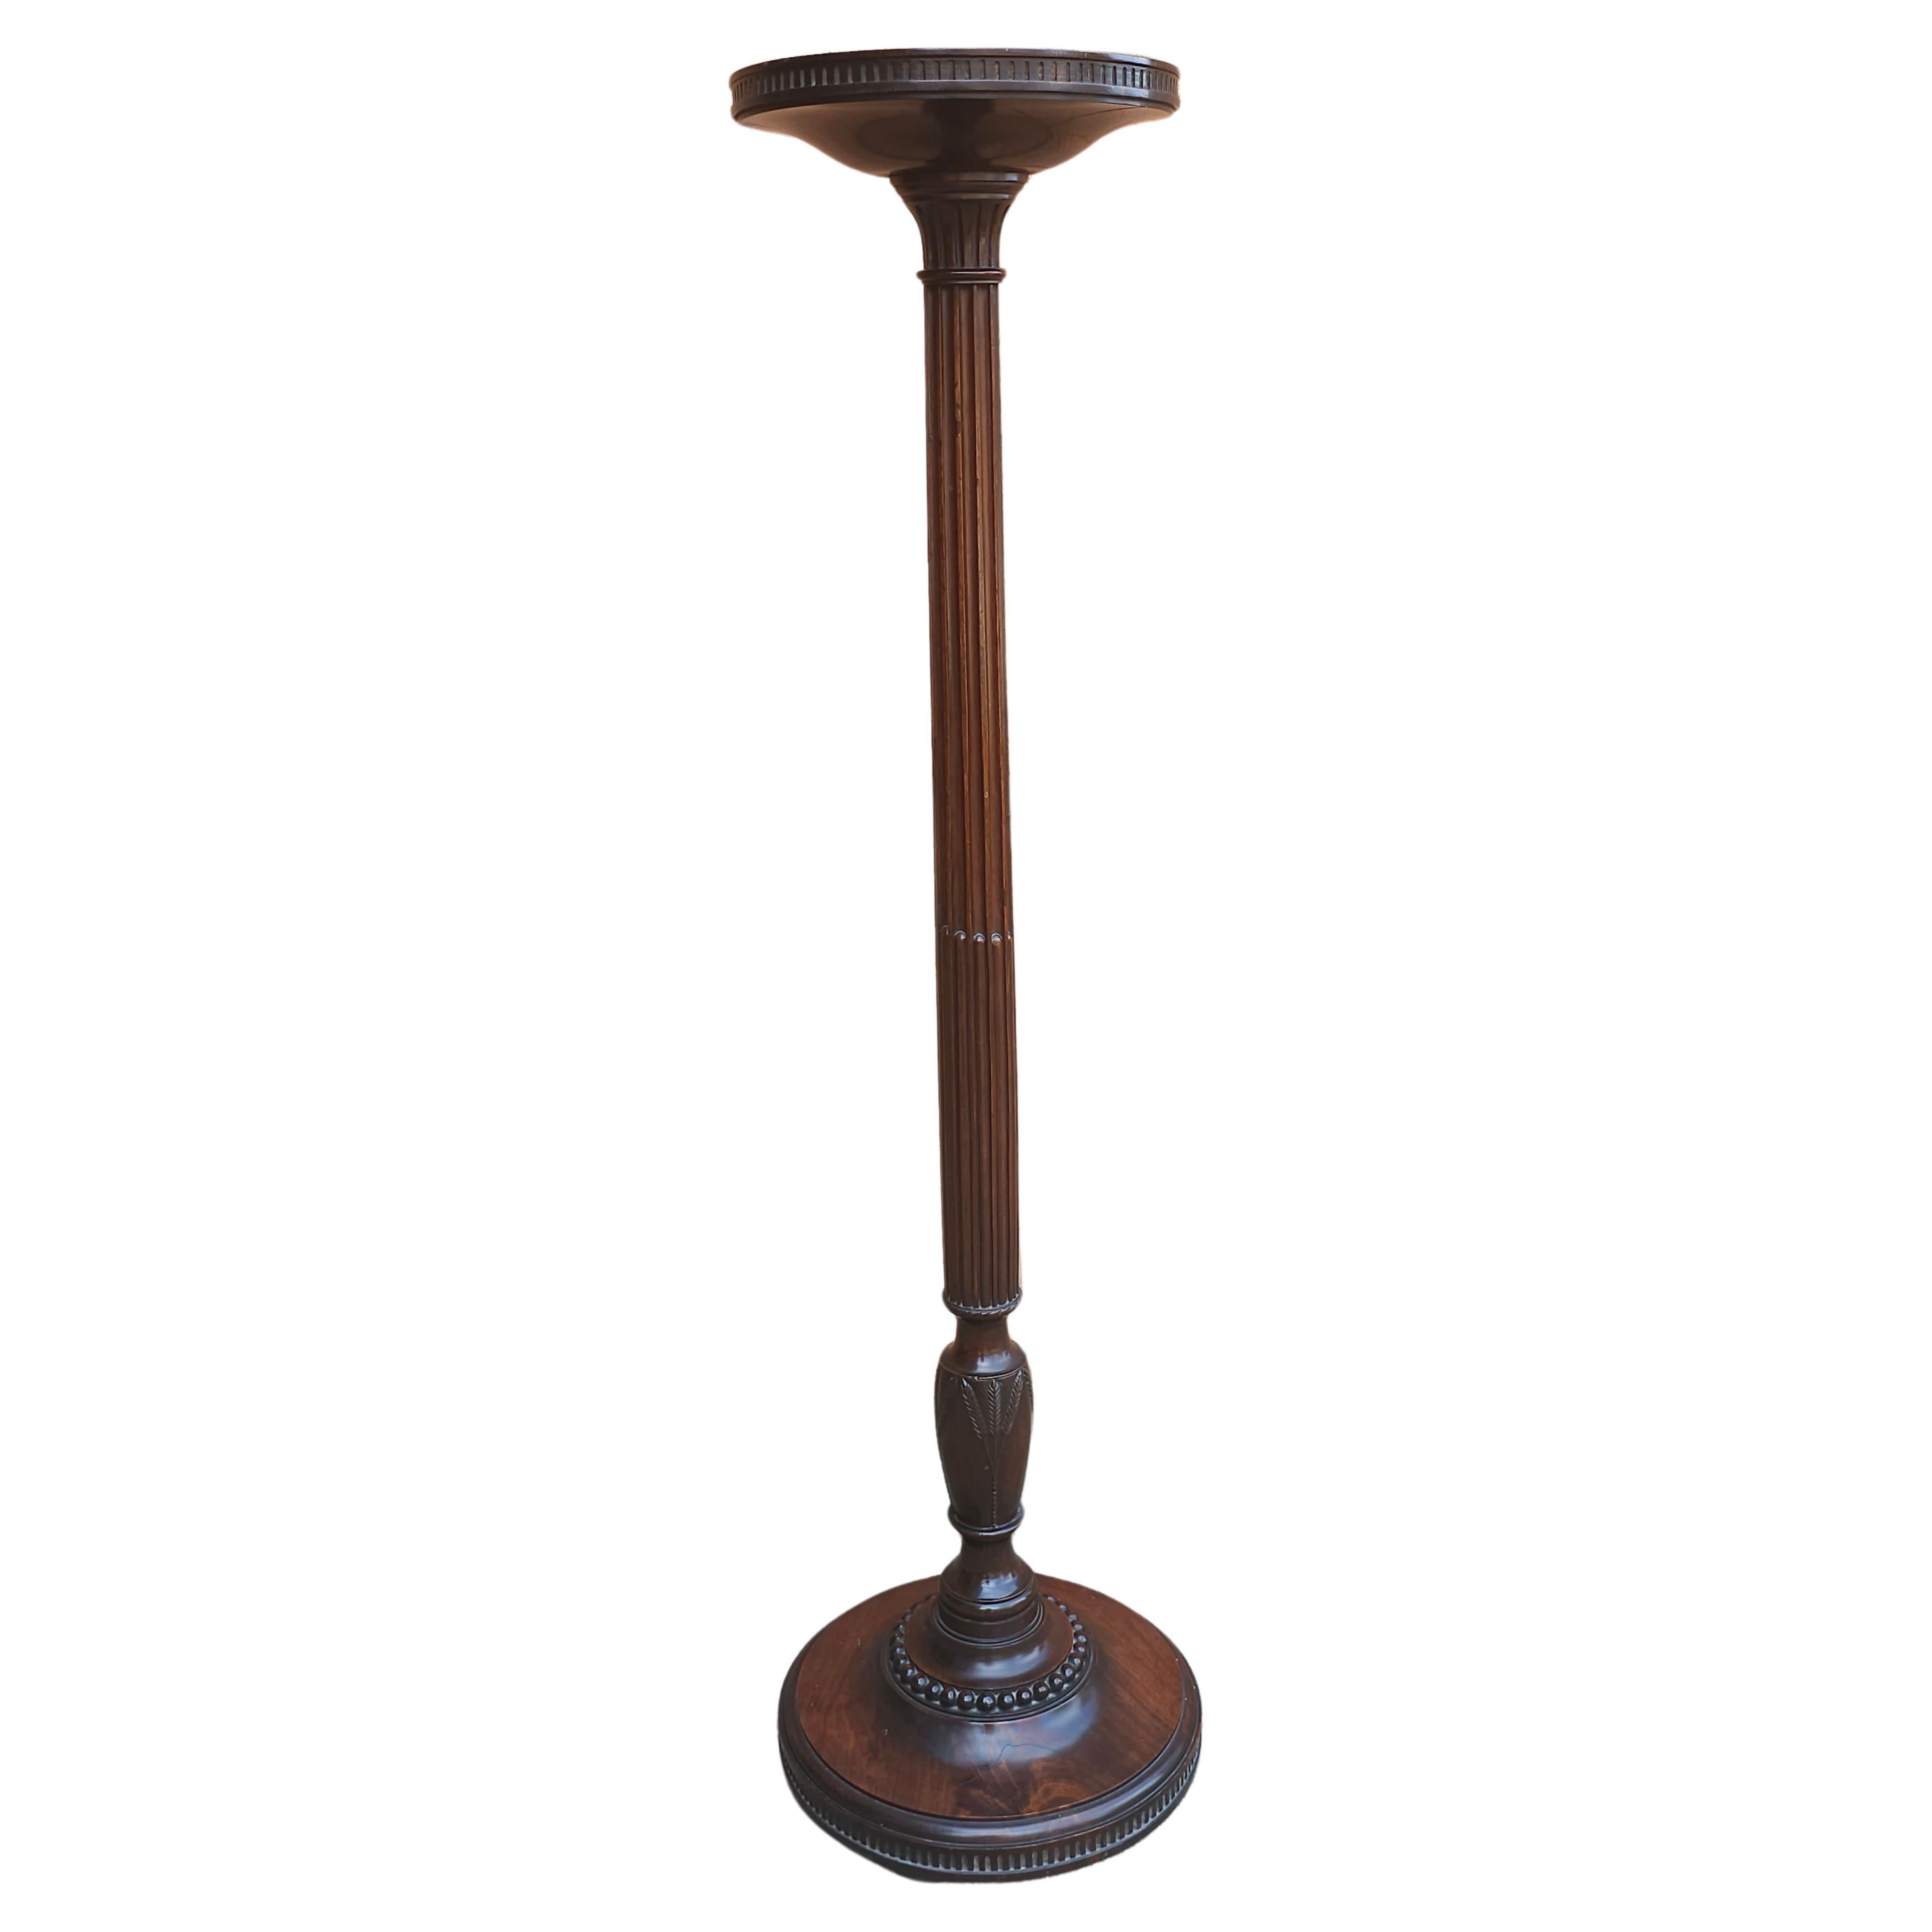 Early 20th Century Neoclassical Empire style Mahogany Pedestal Plant Stand. Measures 15